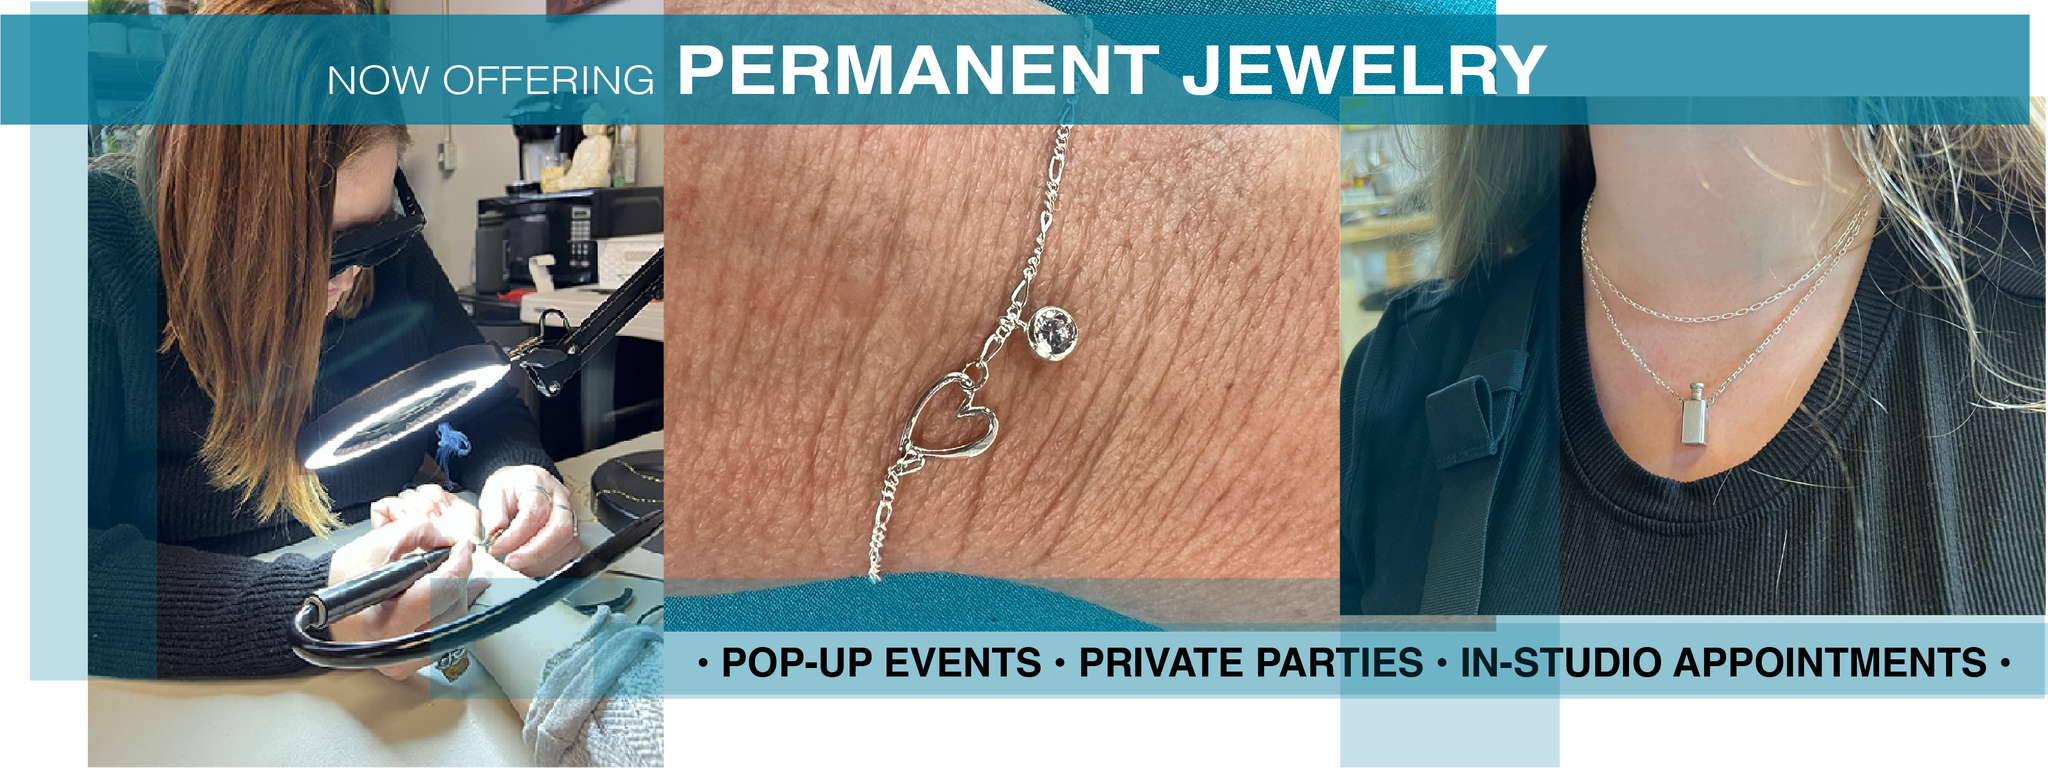 Permanent Jewelry Has Evolved From a Trend to a Permanent Business - JCK